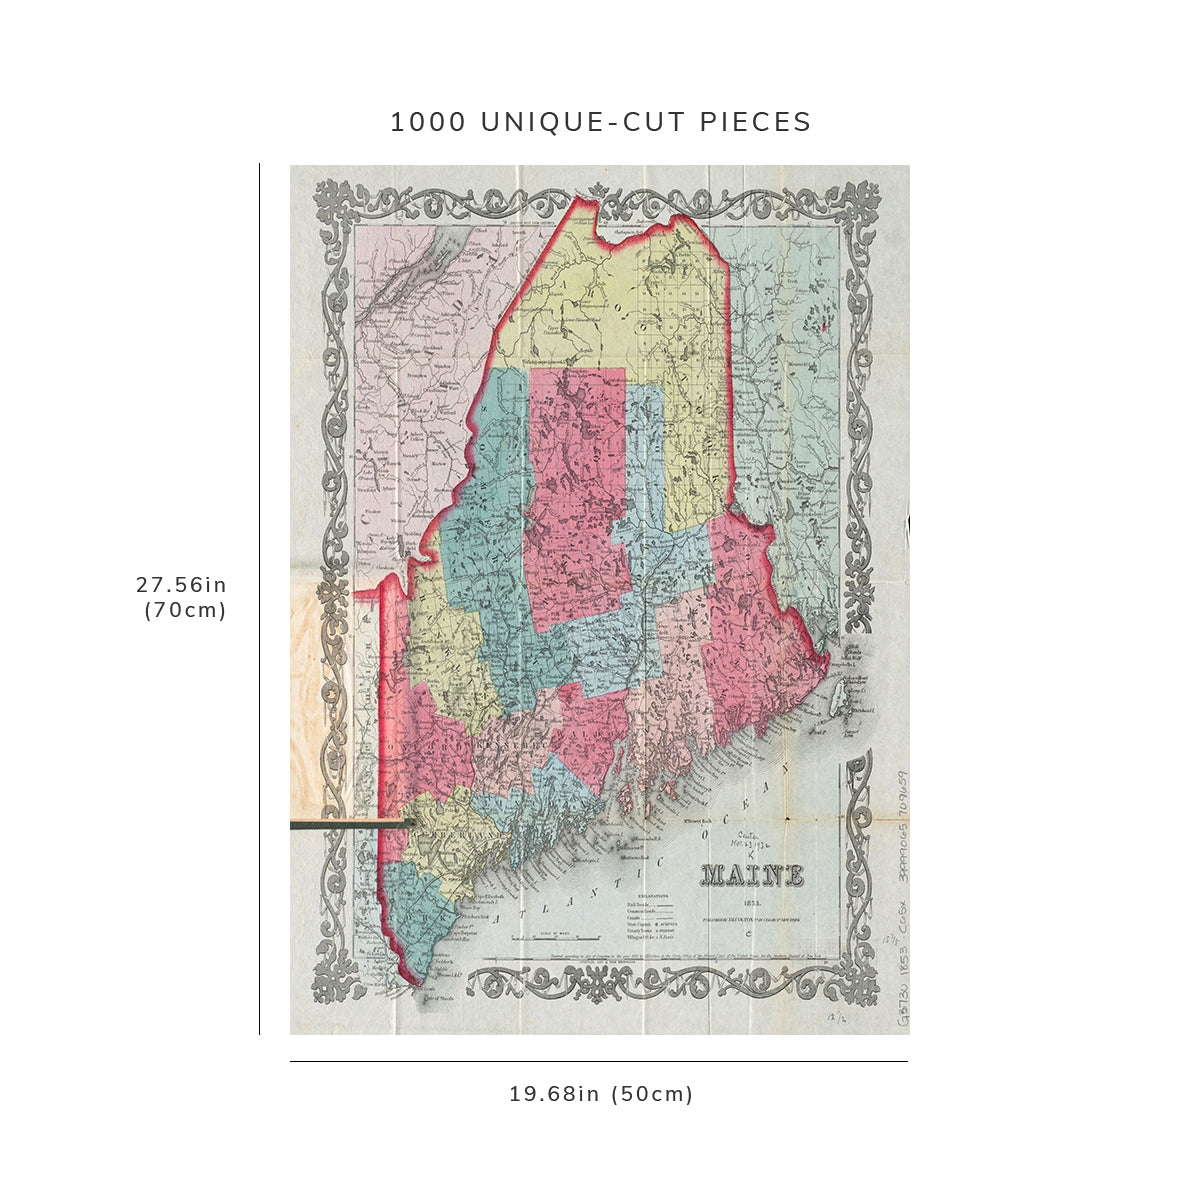 1000 Piece Jigsaw Puzzle: 1853 Map | Map of Maine Relief shown by hachures